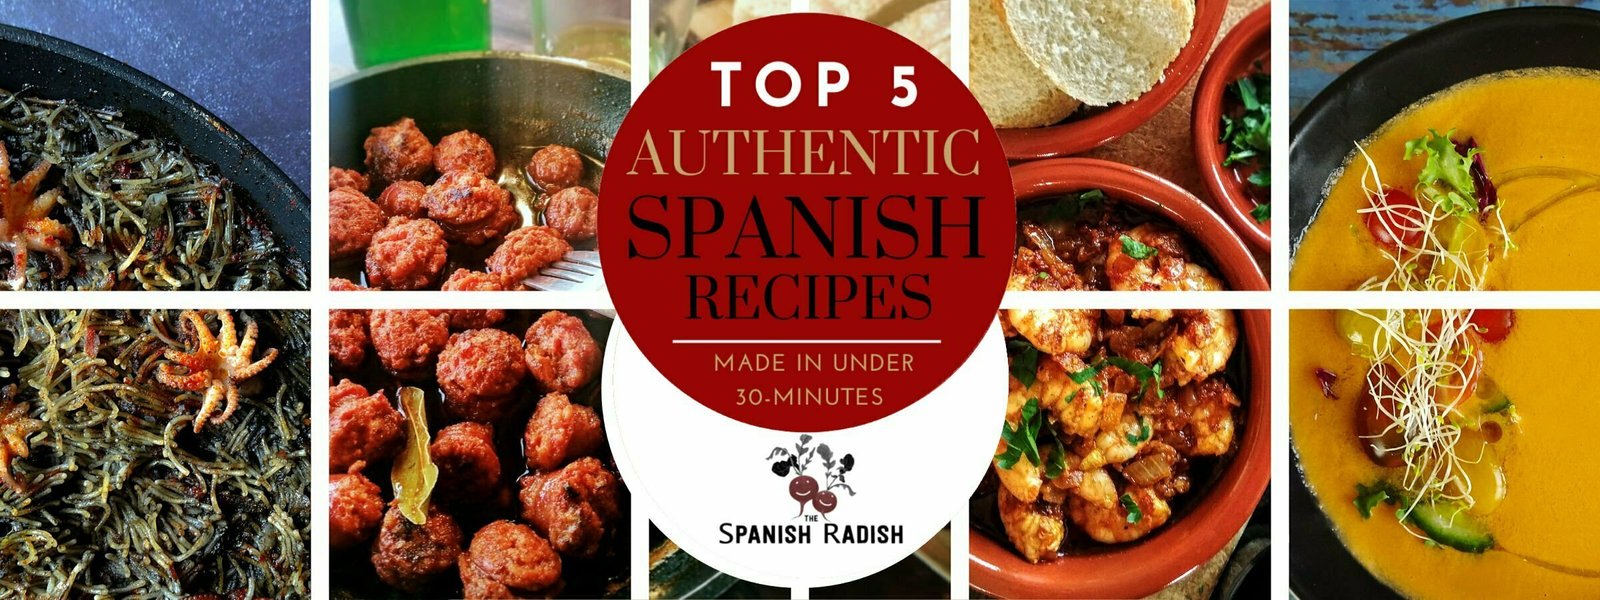 infographic with text "top 5 authentic Spanish recipes made in under 30-minutes"